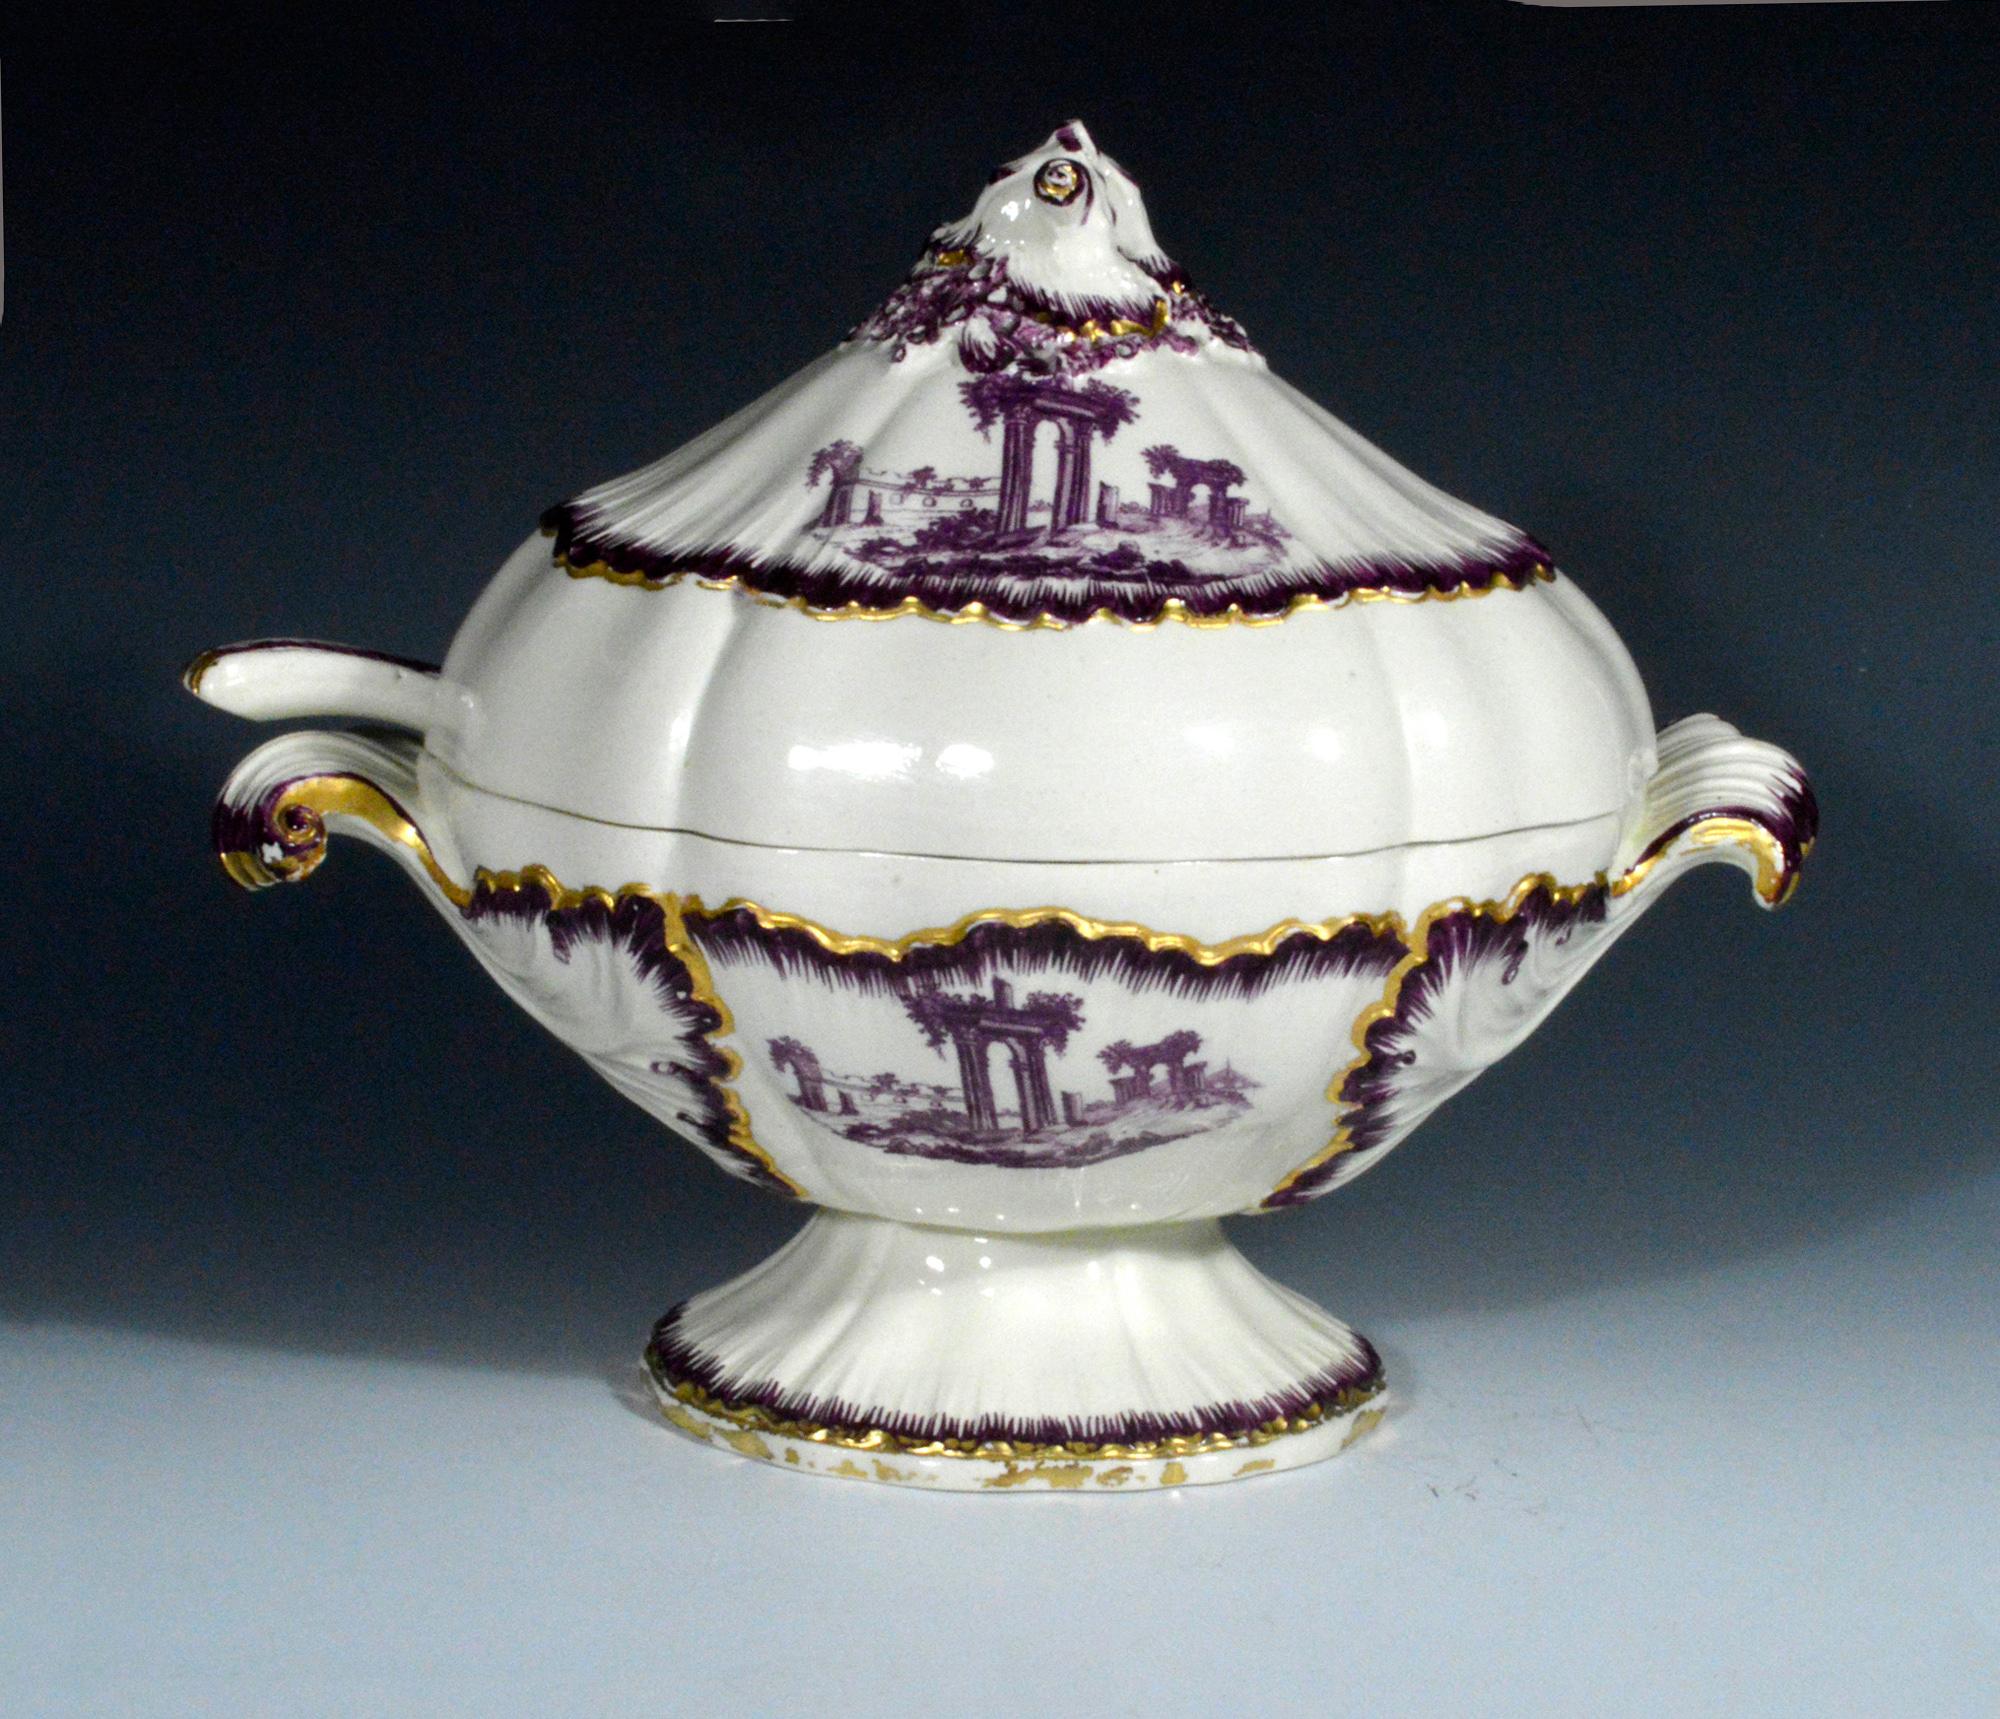 18th Century Shell-Edge Creamware Sauce Tureen Puce-Decorated by Neale & Co. For Sale 3